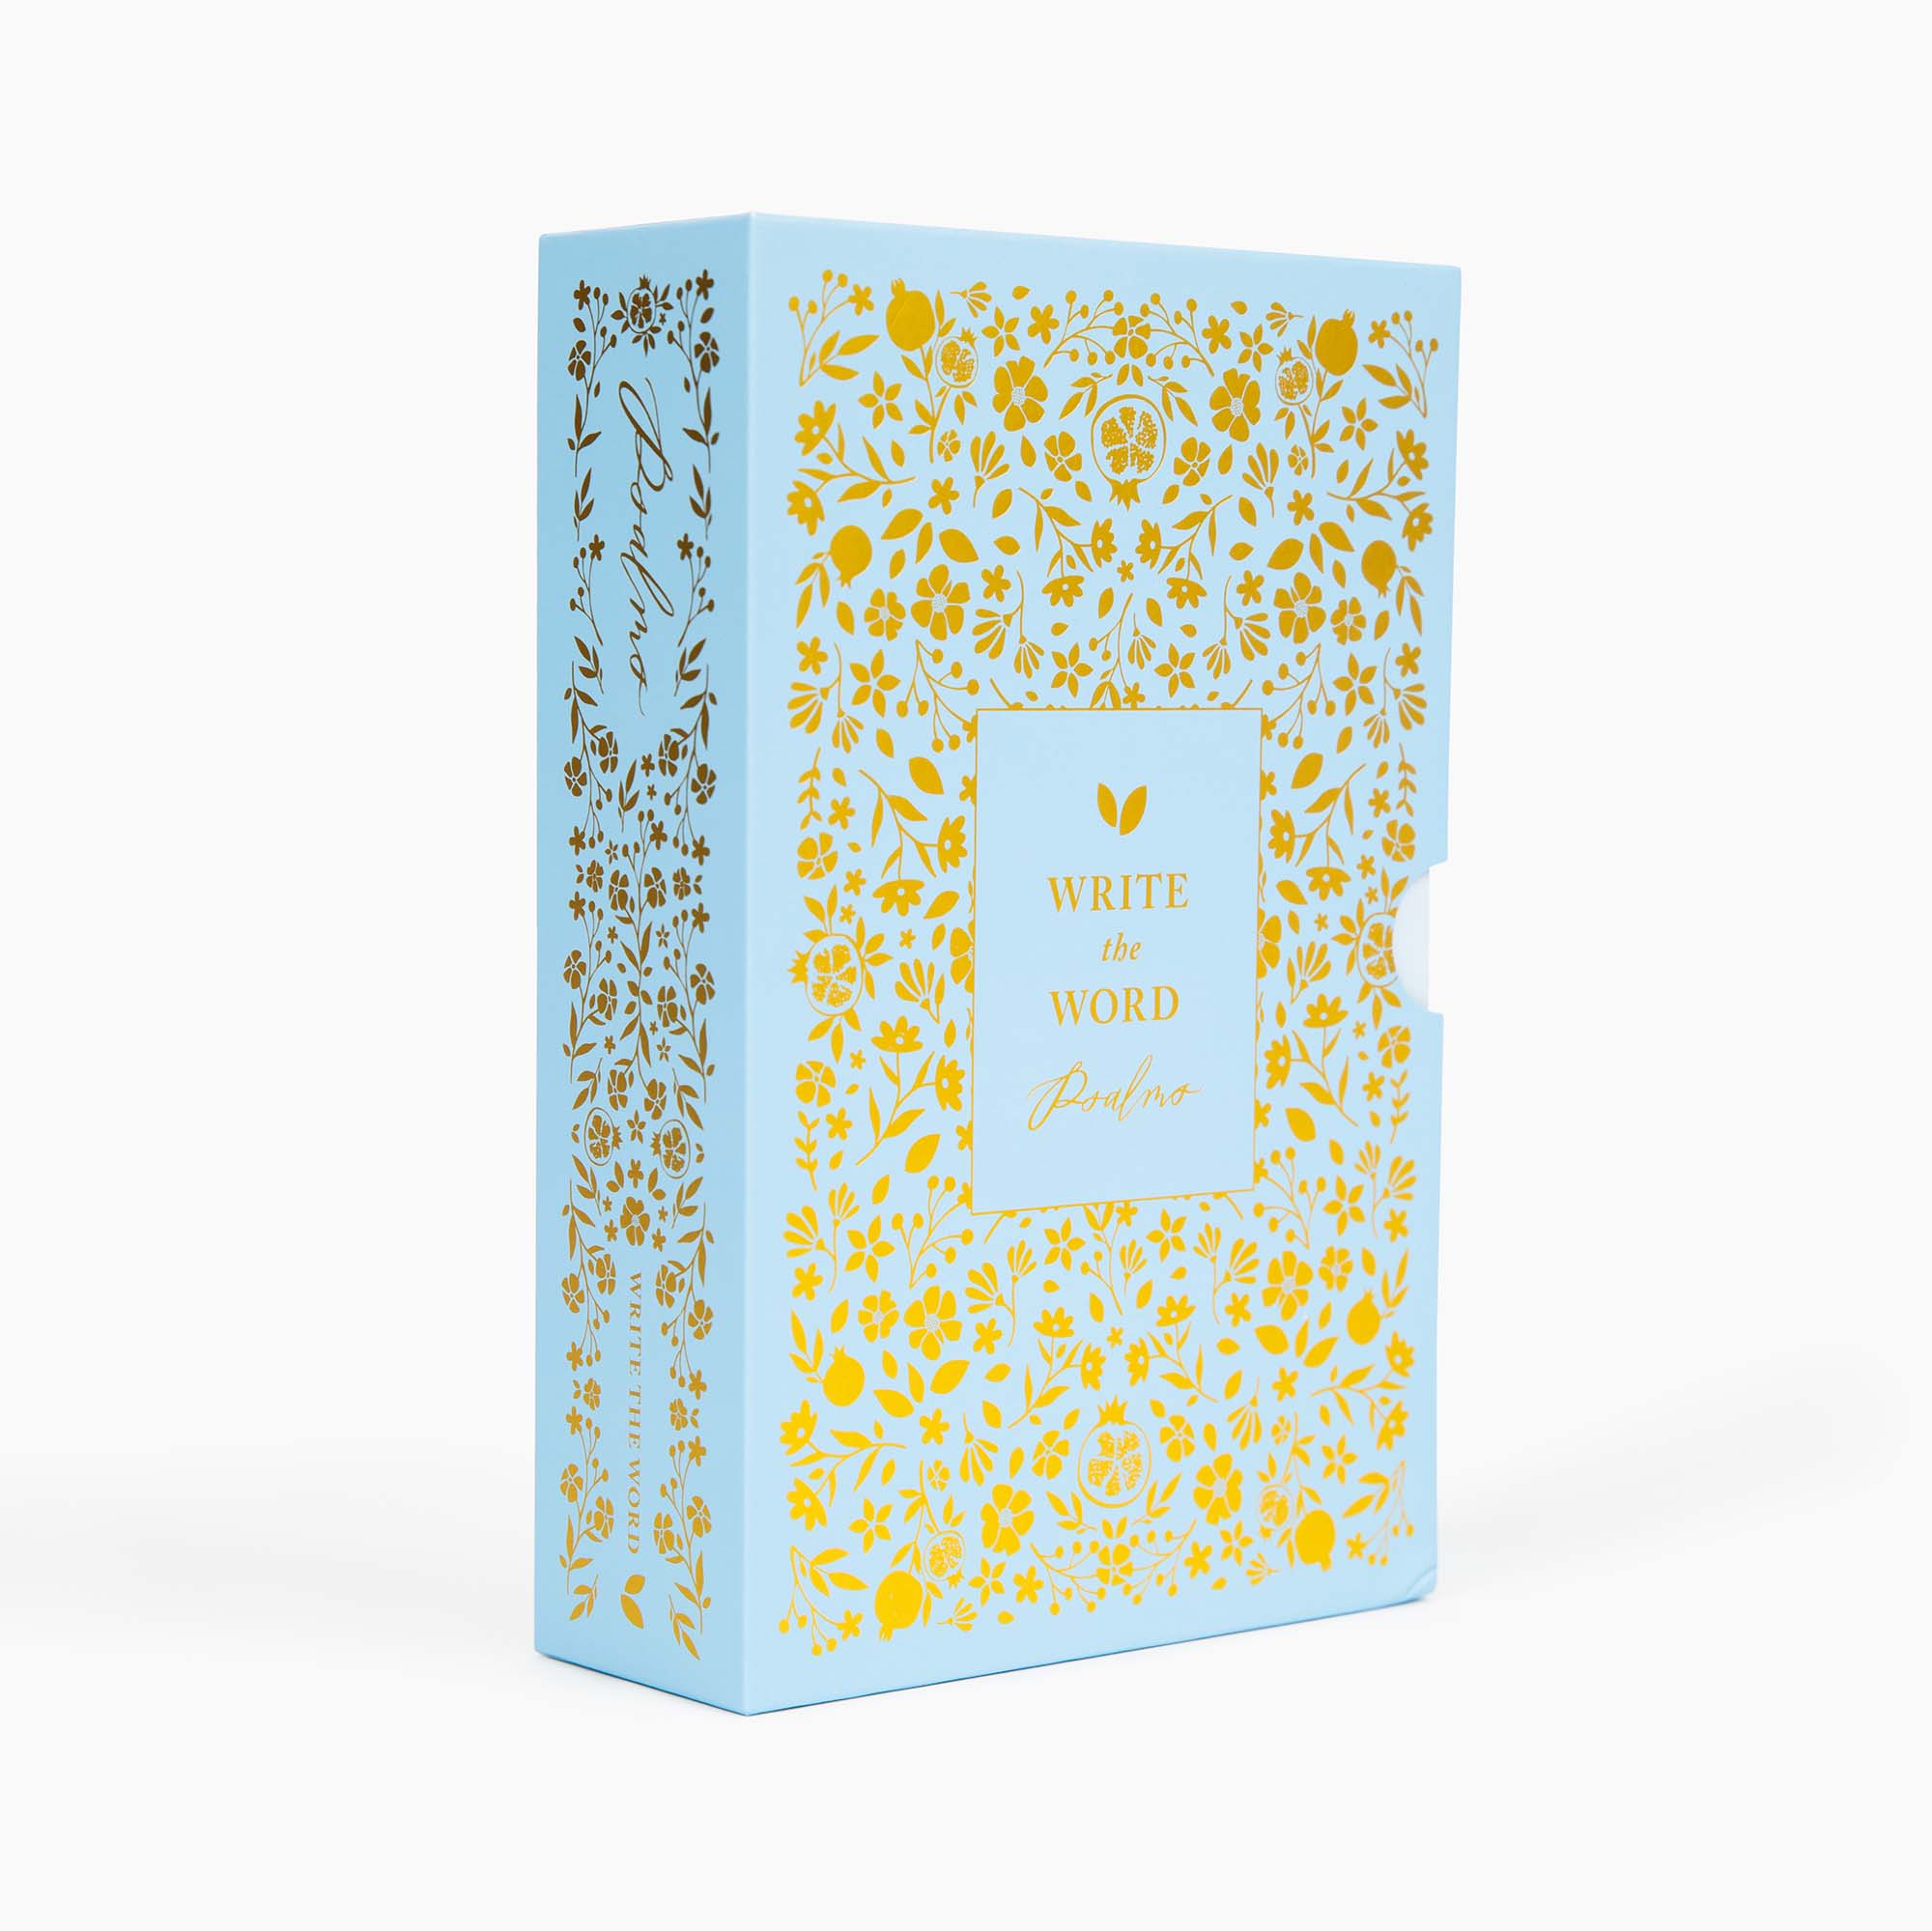  Write the Word® | Psalms Paperback Boxed Set by Cultivate Cultivate Perfumarie